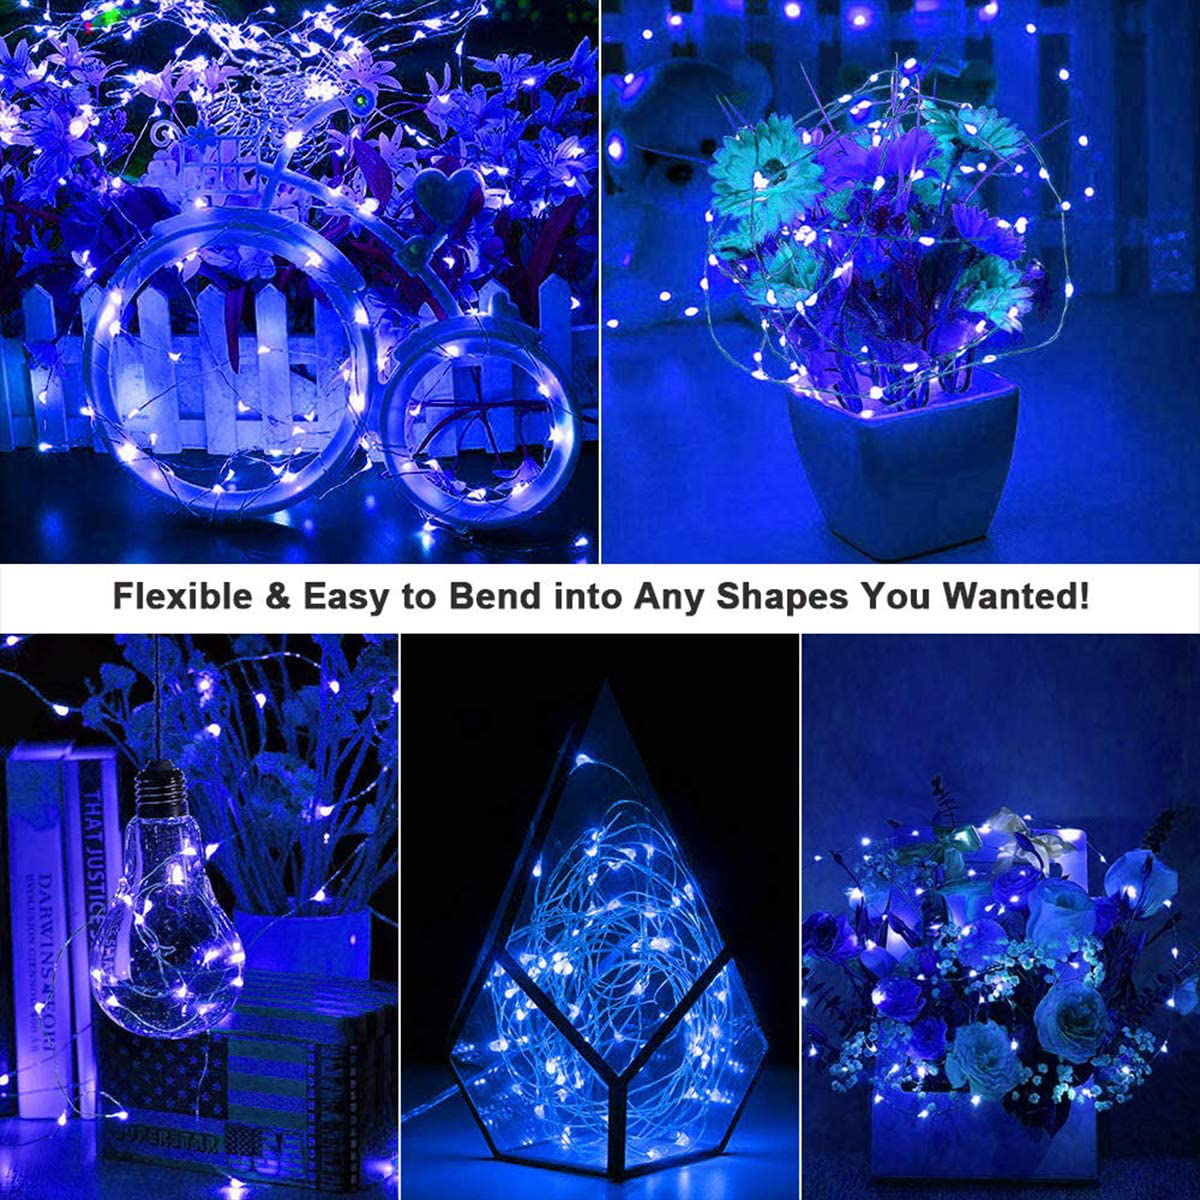 Ariceleo Led Fairy Lights Battery Operated, 4 Packs Mini Battery Powered Copper Wire Starry Fairy Lights for Bedroom, Christmas, Parties, Wedding, Centerpiece, Decoration (5m/16ft Multi-Colored)